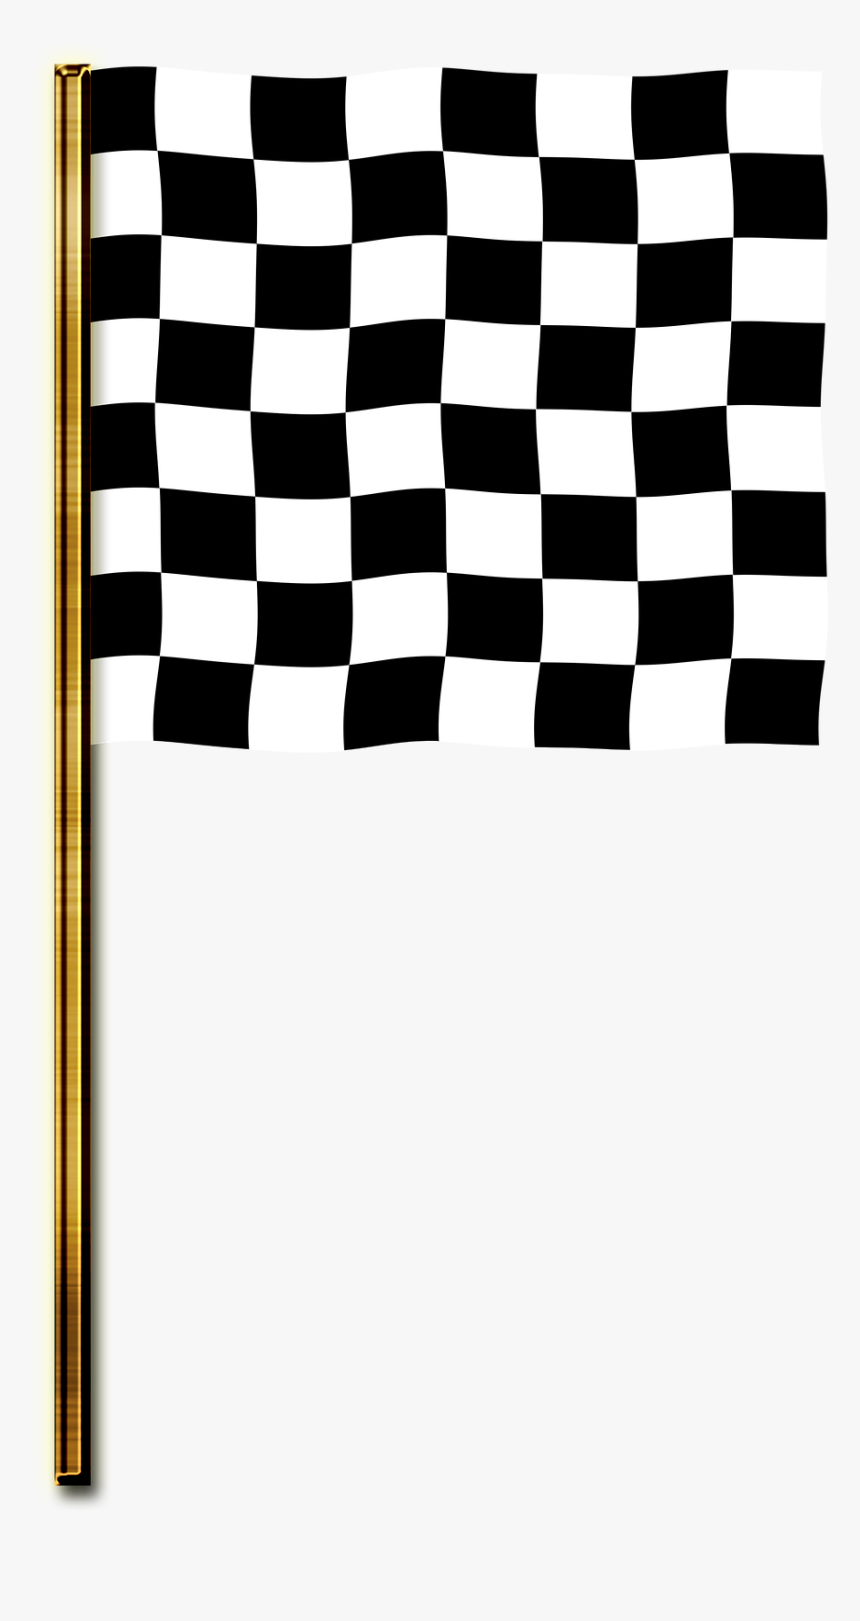 Checkered Flags Png - 9 By 9 Chess Board, Transparent Png, Free Download